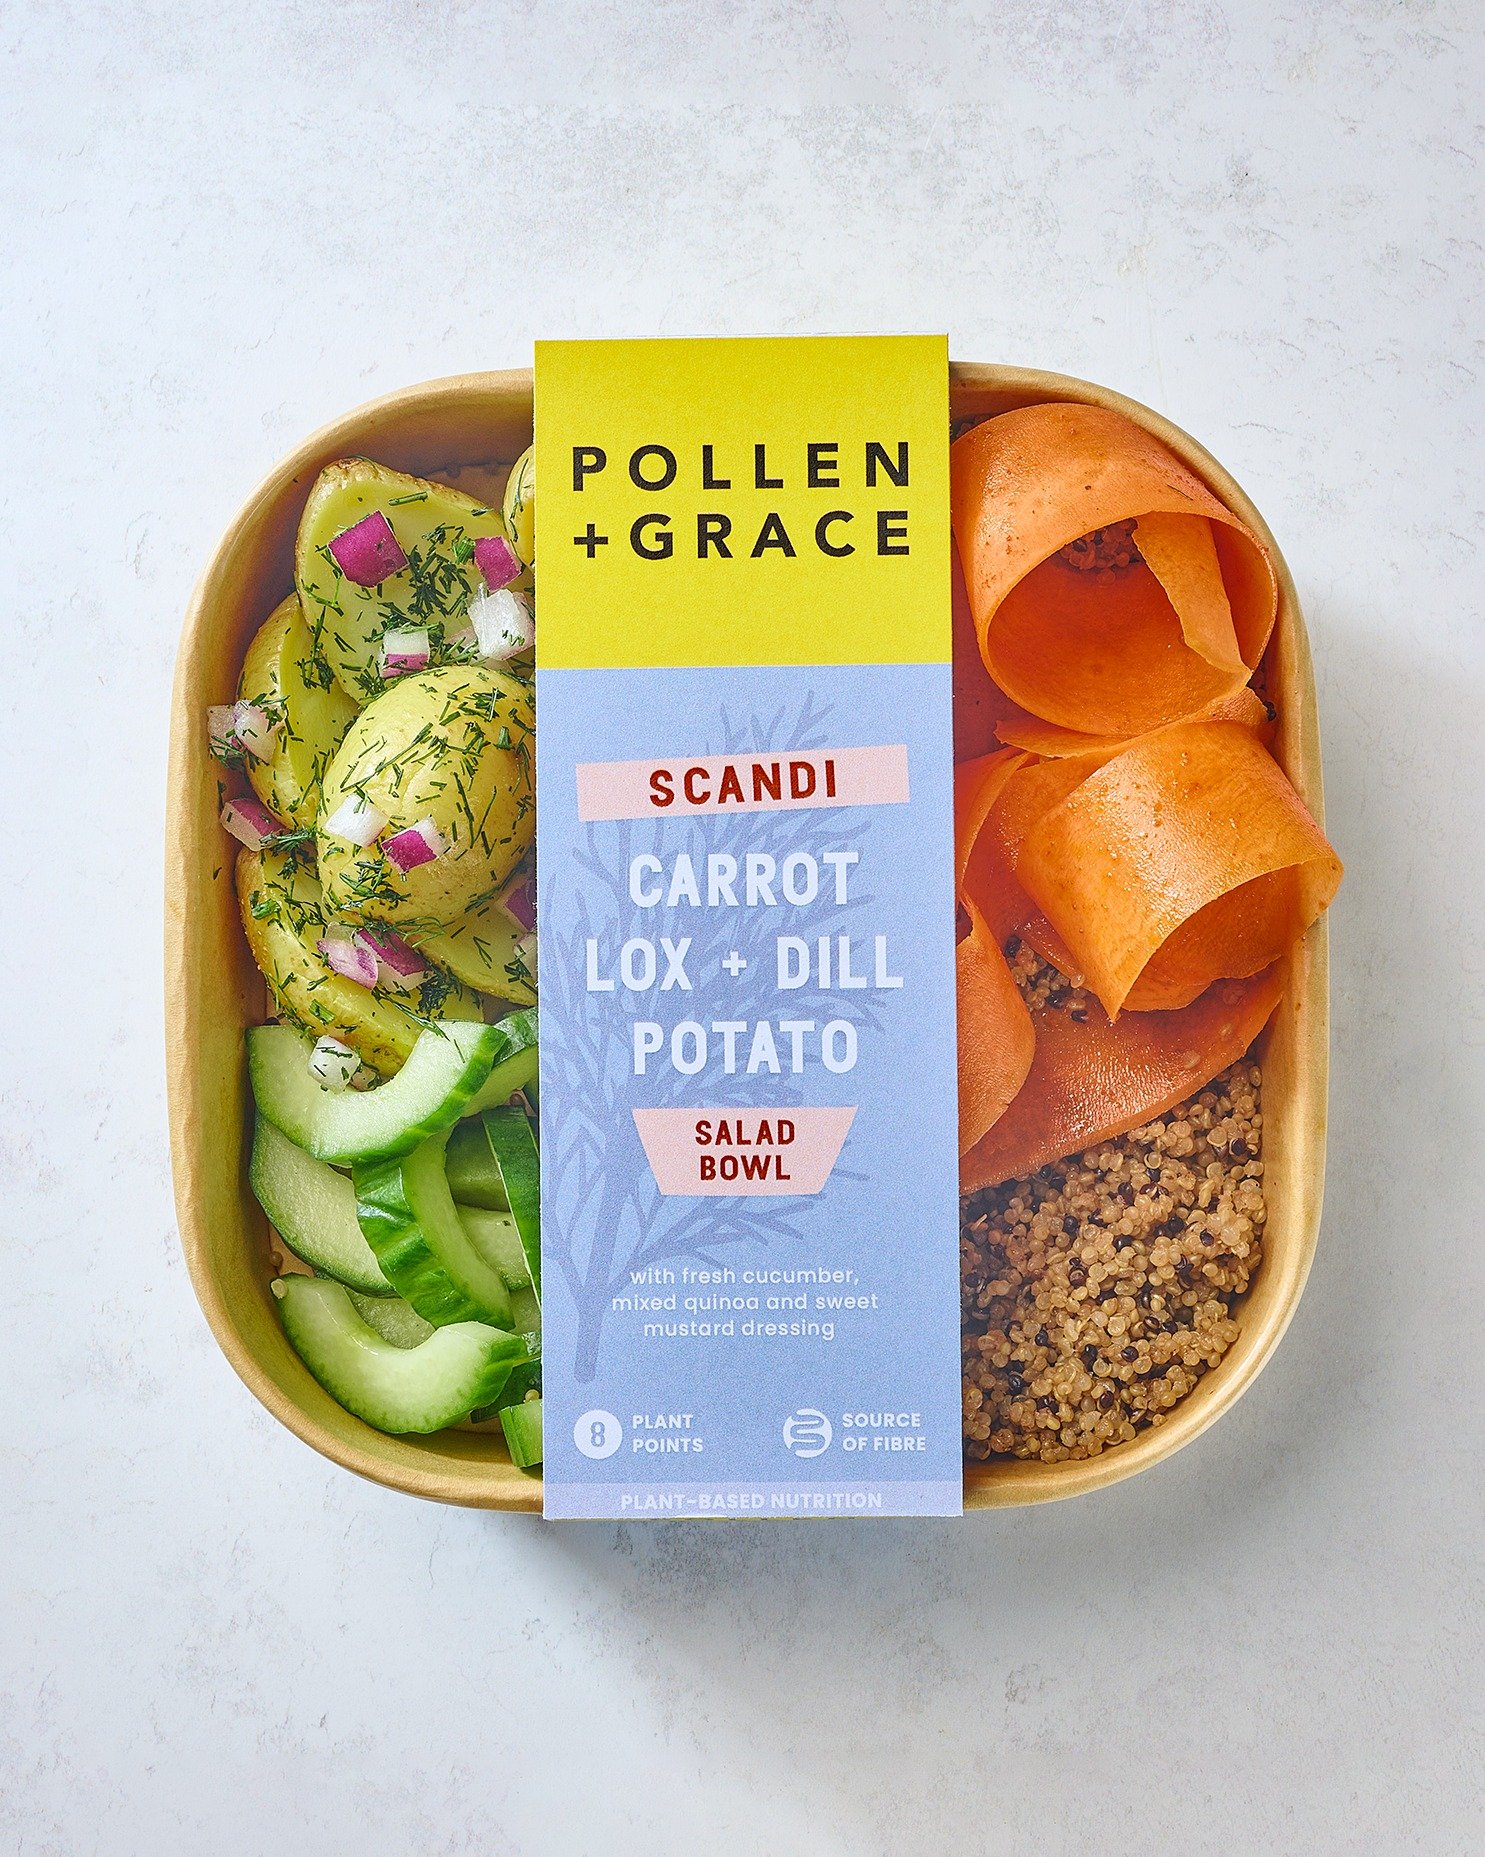 Say hello to our ✨NEW✨ Scandi Carrot Lox + Dill Potato Salad Bowl 🥕🤩

It's fresh and herby with plenty of flavour from the sweet mustard dressing and dill coated potatoes 🌱 A spring lunchtime staple 🥗🫶

What's in it??
Carrot &lsquo;lox&rsquo; (o